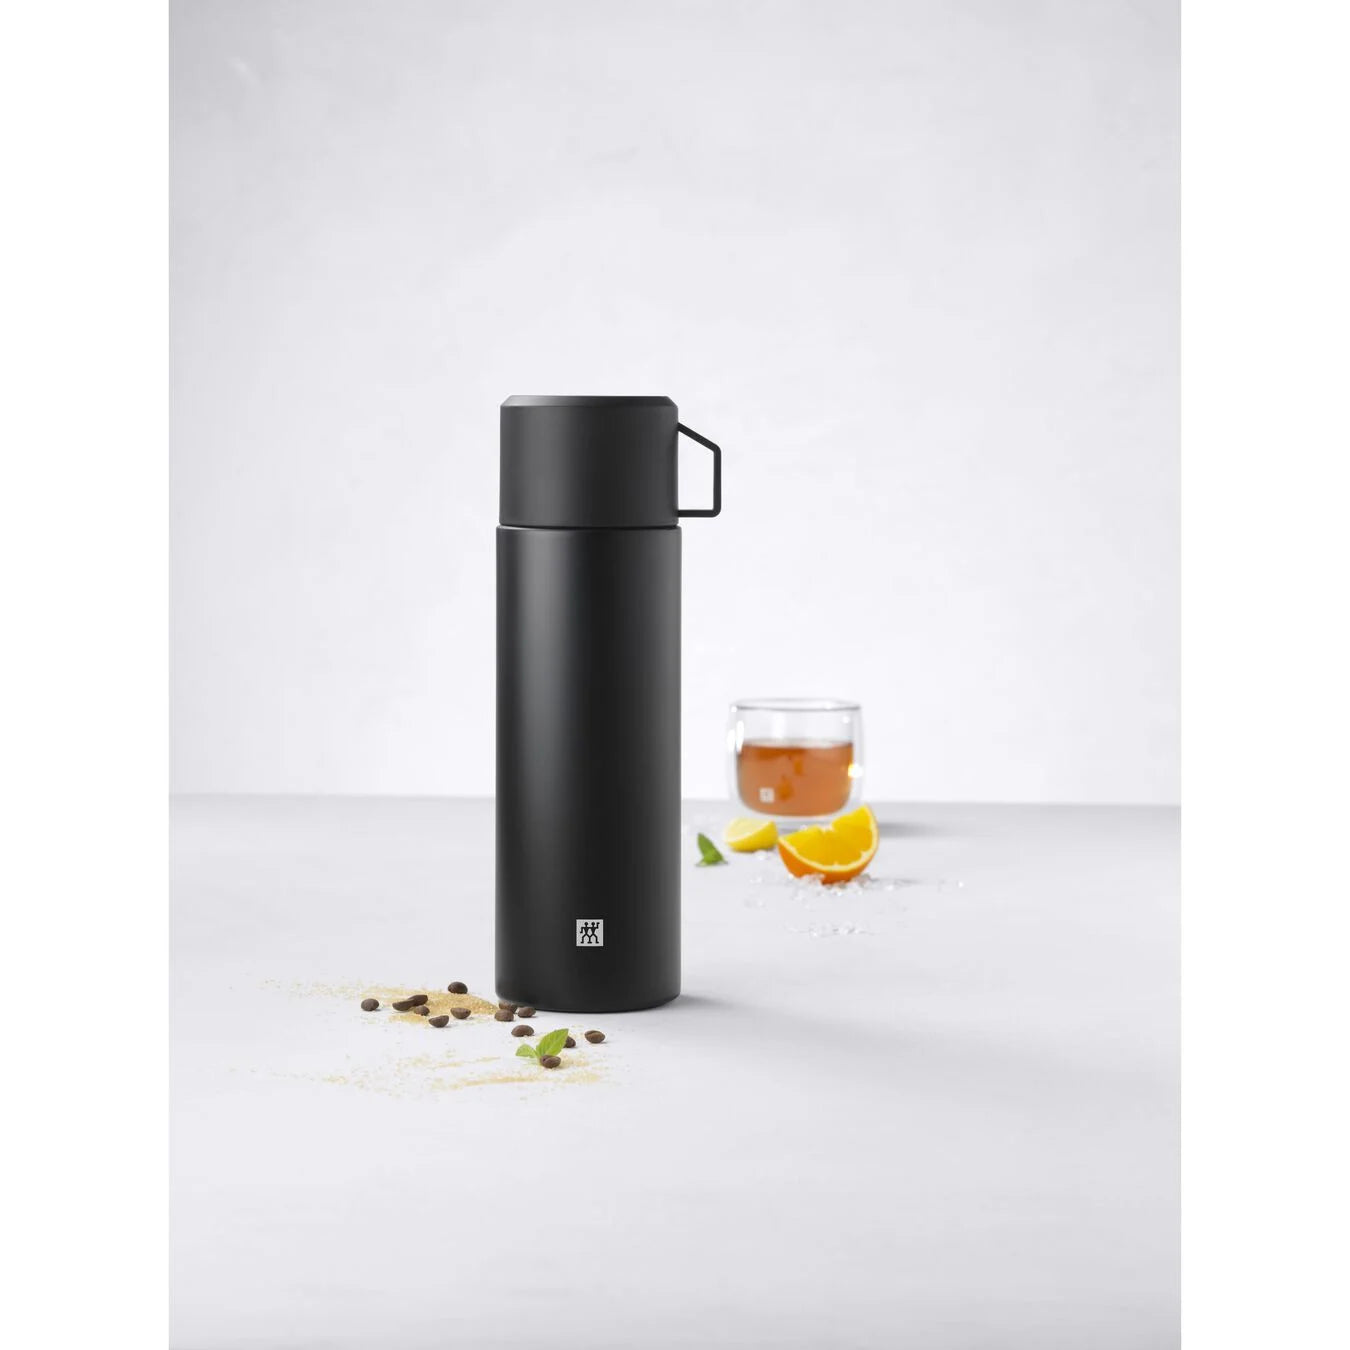 ZWILLING THERMO 33.8 OZ BEVERAGE FLASK